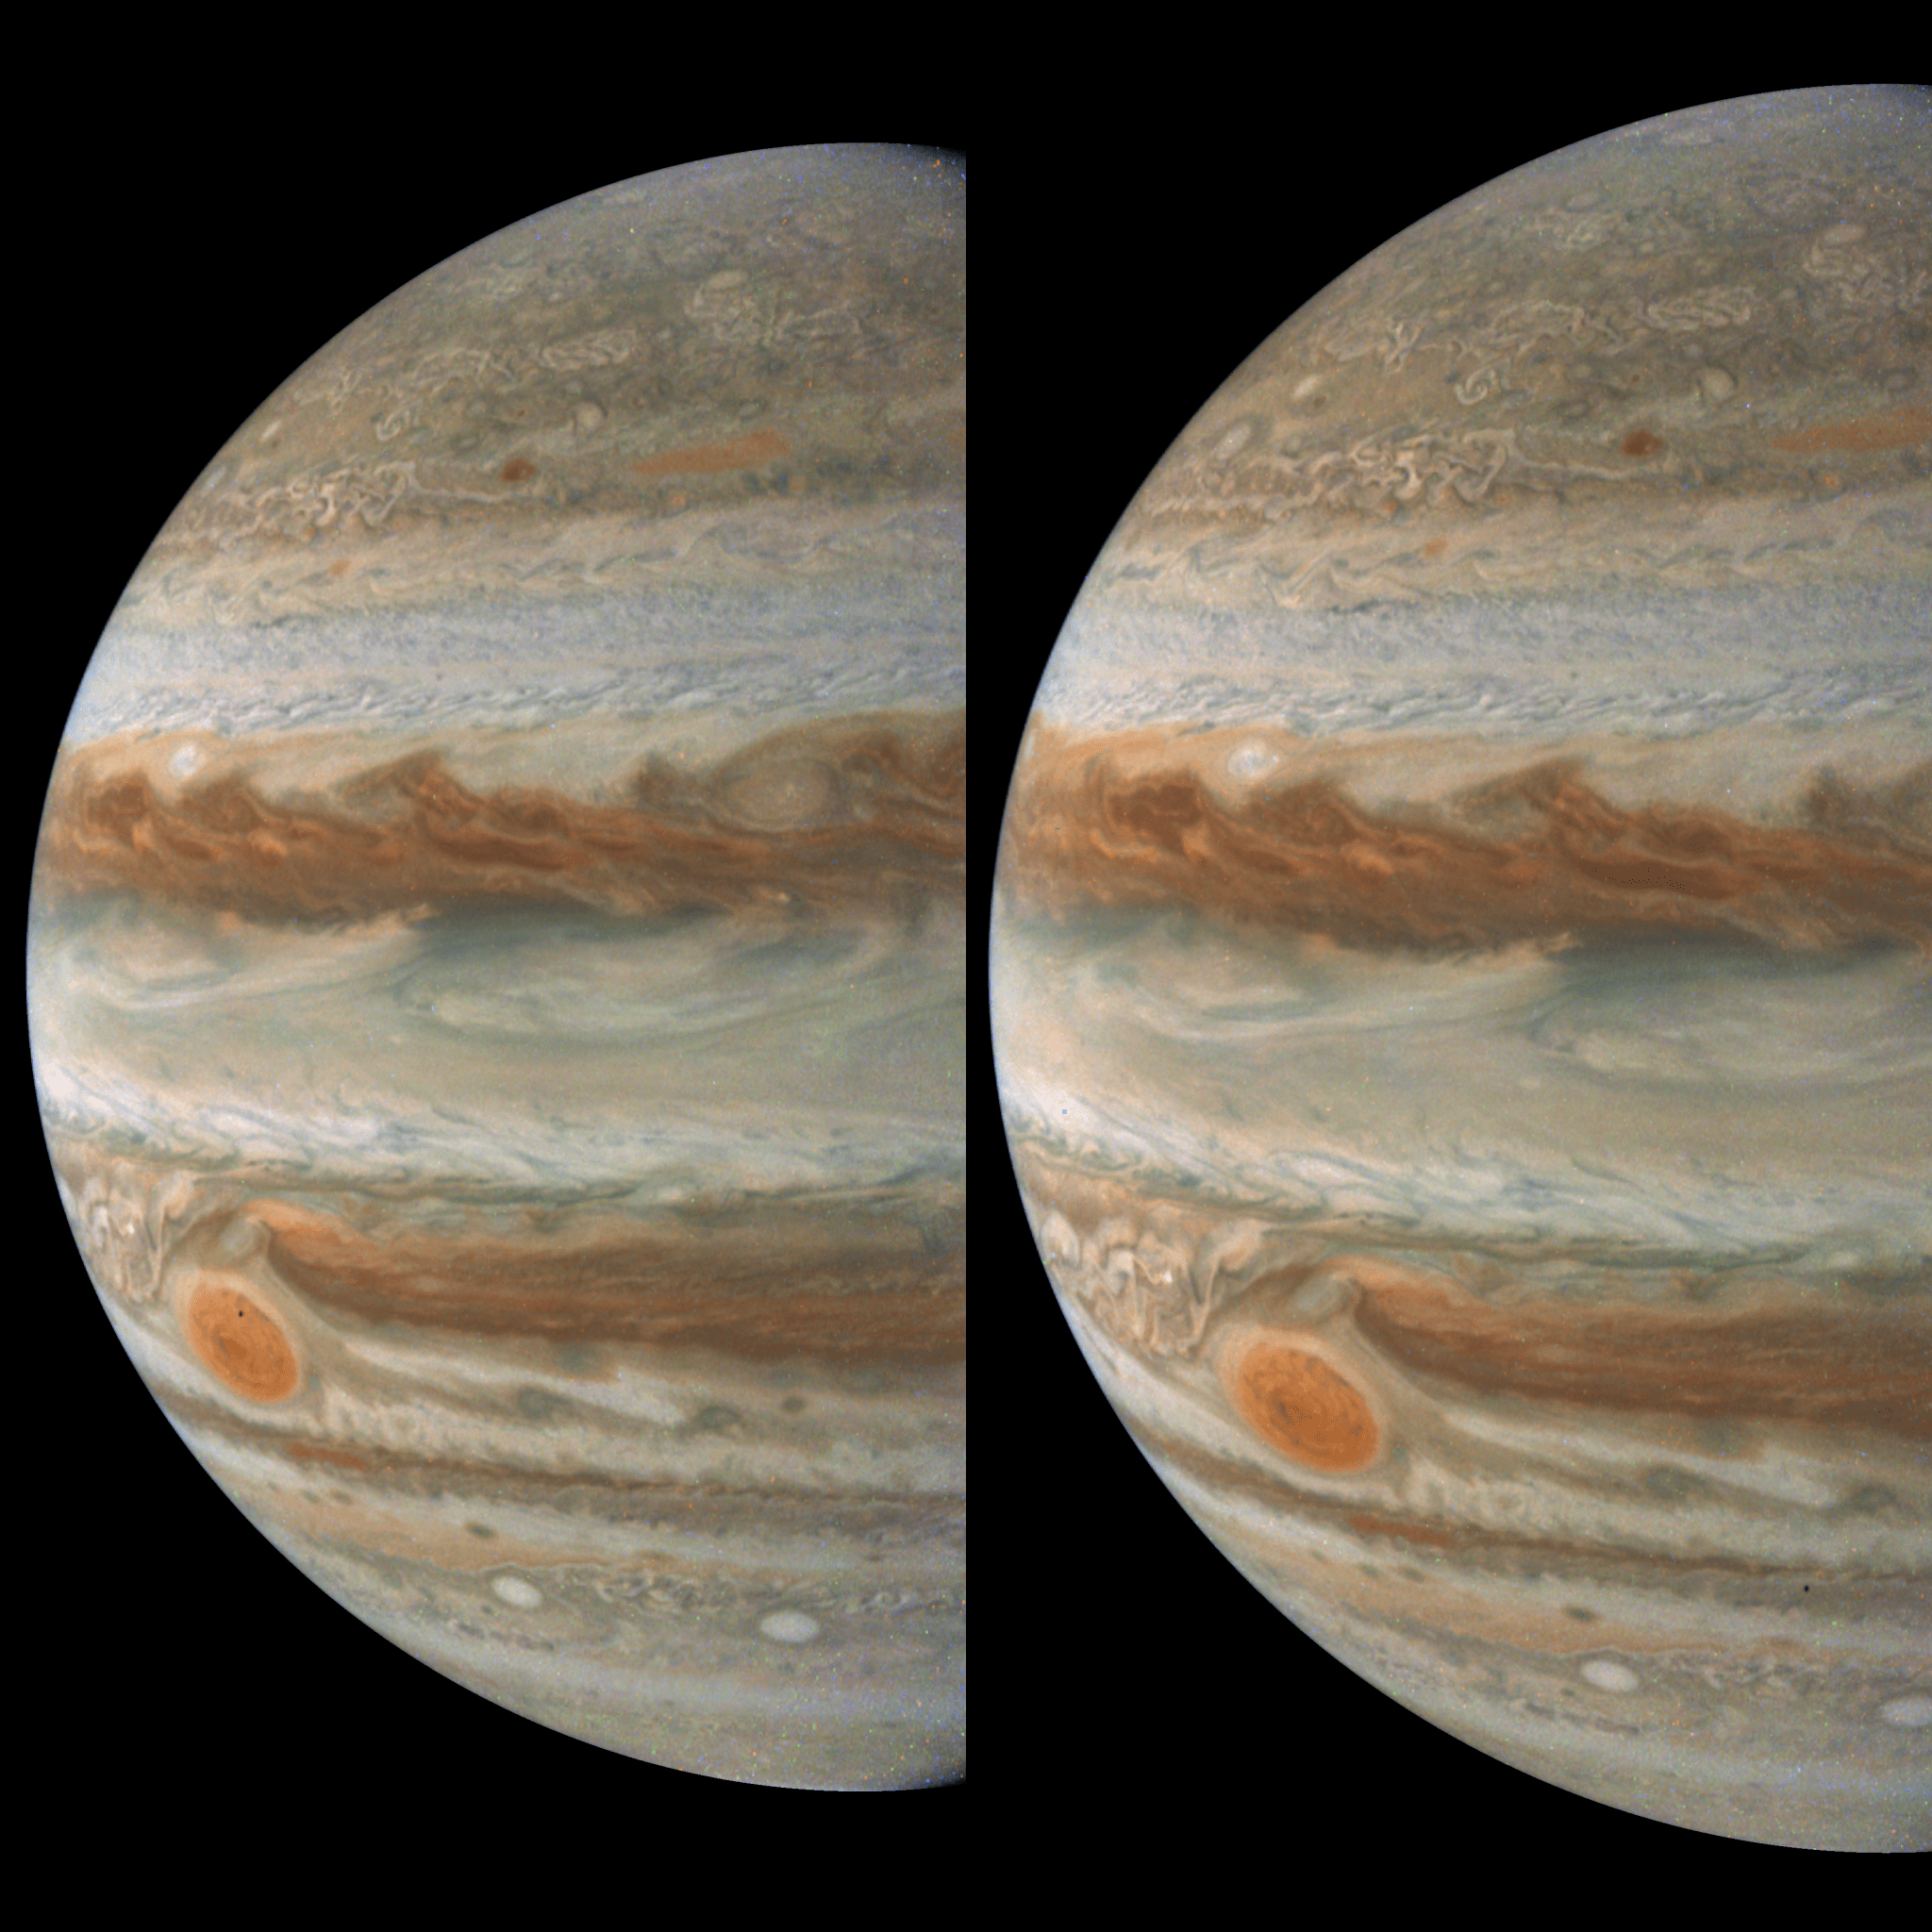 NASA’s Juno mission captured these views of Jupiter during its 59th close flyby of the giant planet on March 7, 2024. They provide a good look at Jupiter’s colorful belts and swirling storms, including the Great Red Spot.